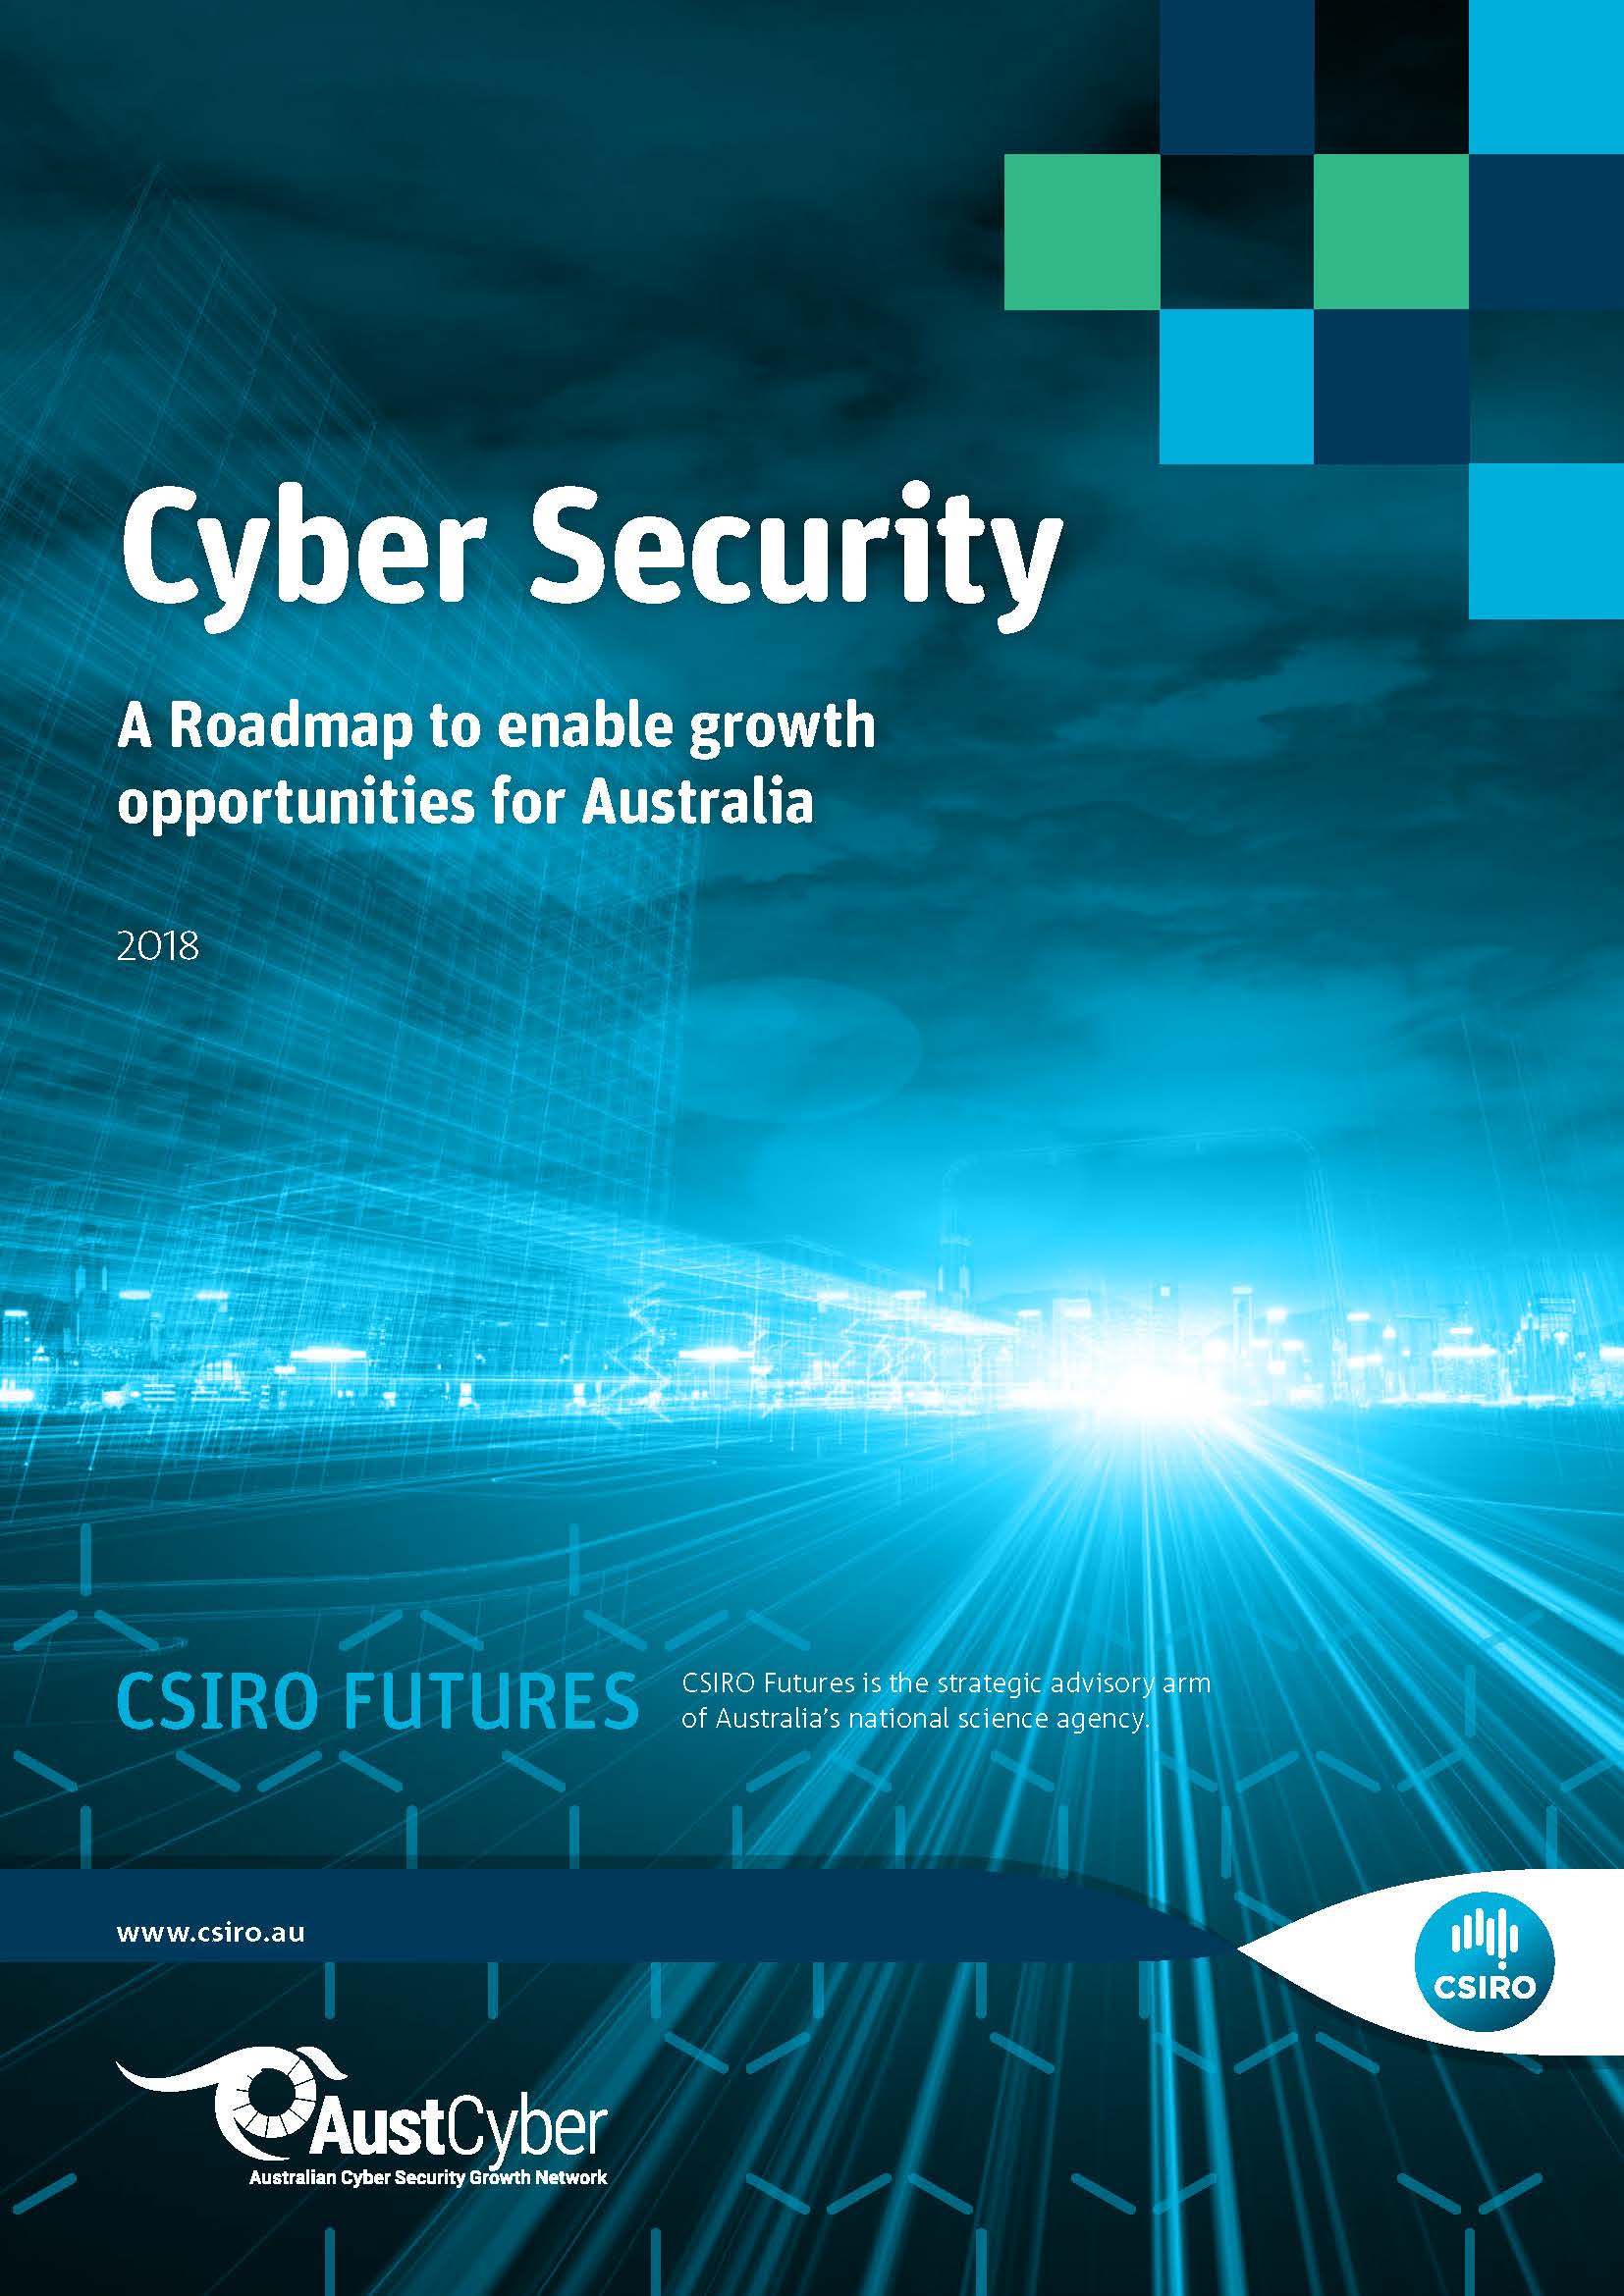 cover of cyber security road mpa - blue wiht sun streaming throguh clouds. Says - Cyber Security A Roadmap to enable growth opportunities for Australia - CSIRO Futures. AustCyber and CSIRO logo on bottom. 